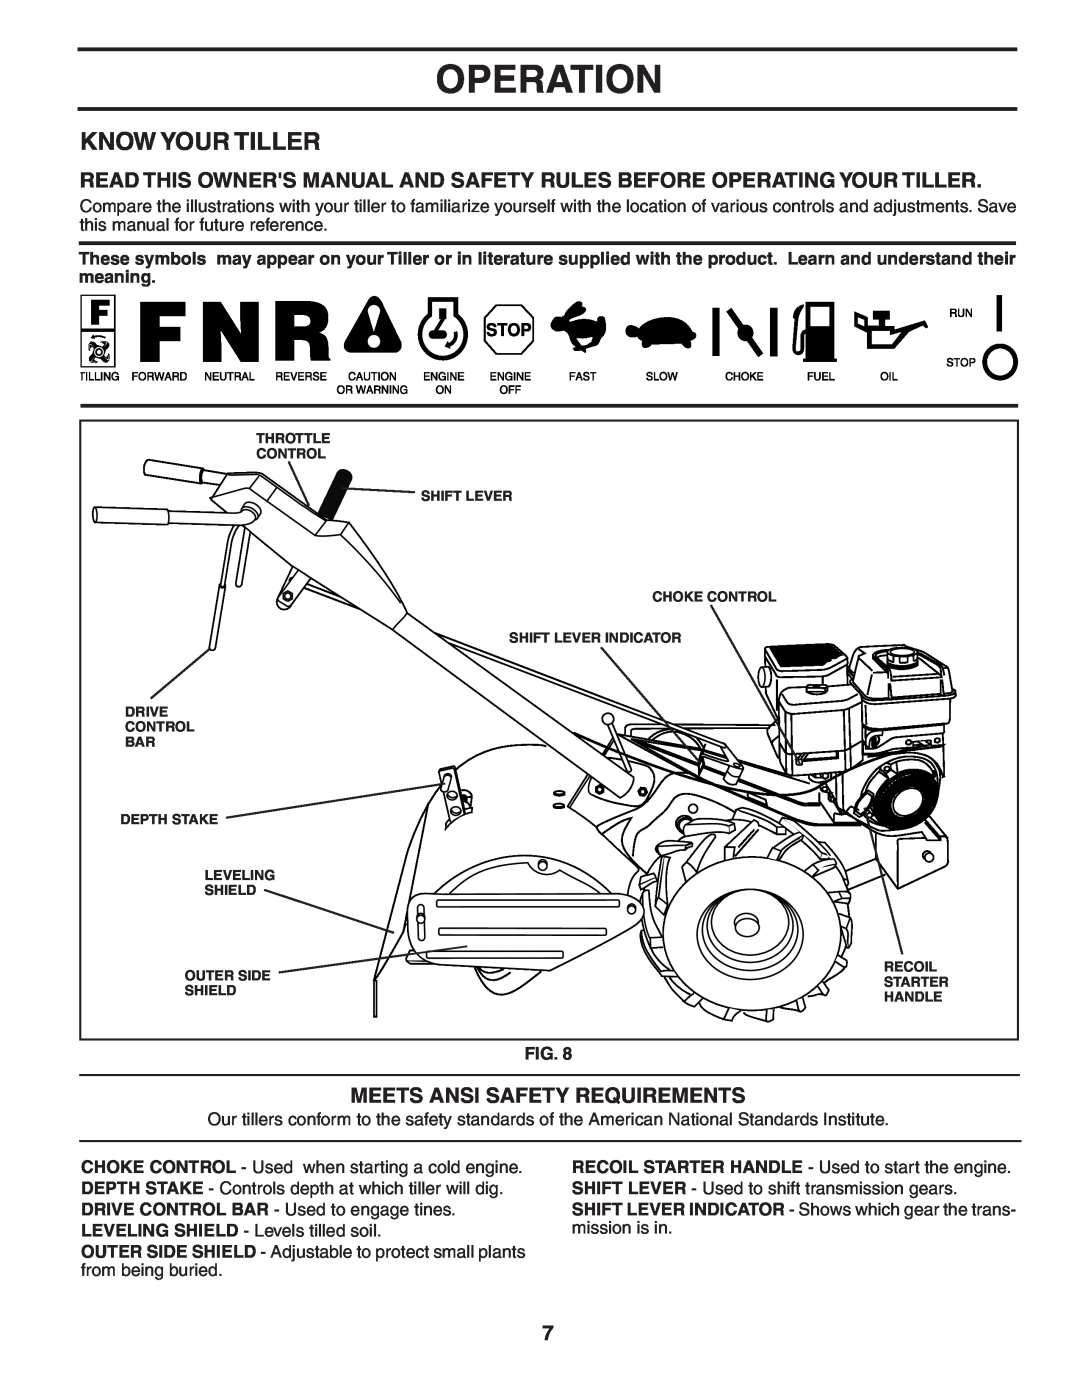 Poulan 96092000400 manual Operation, Know Your Tiller, Meets Ansi Safety Requirements 